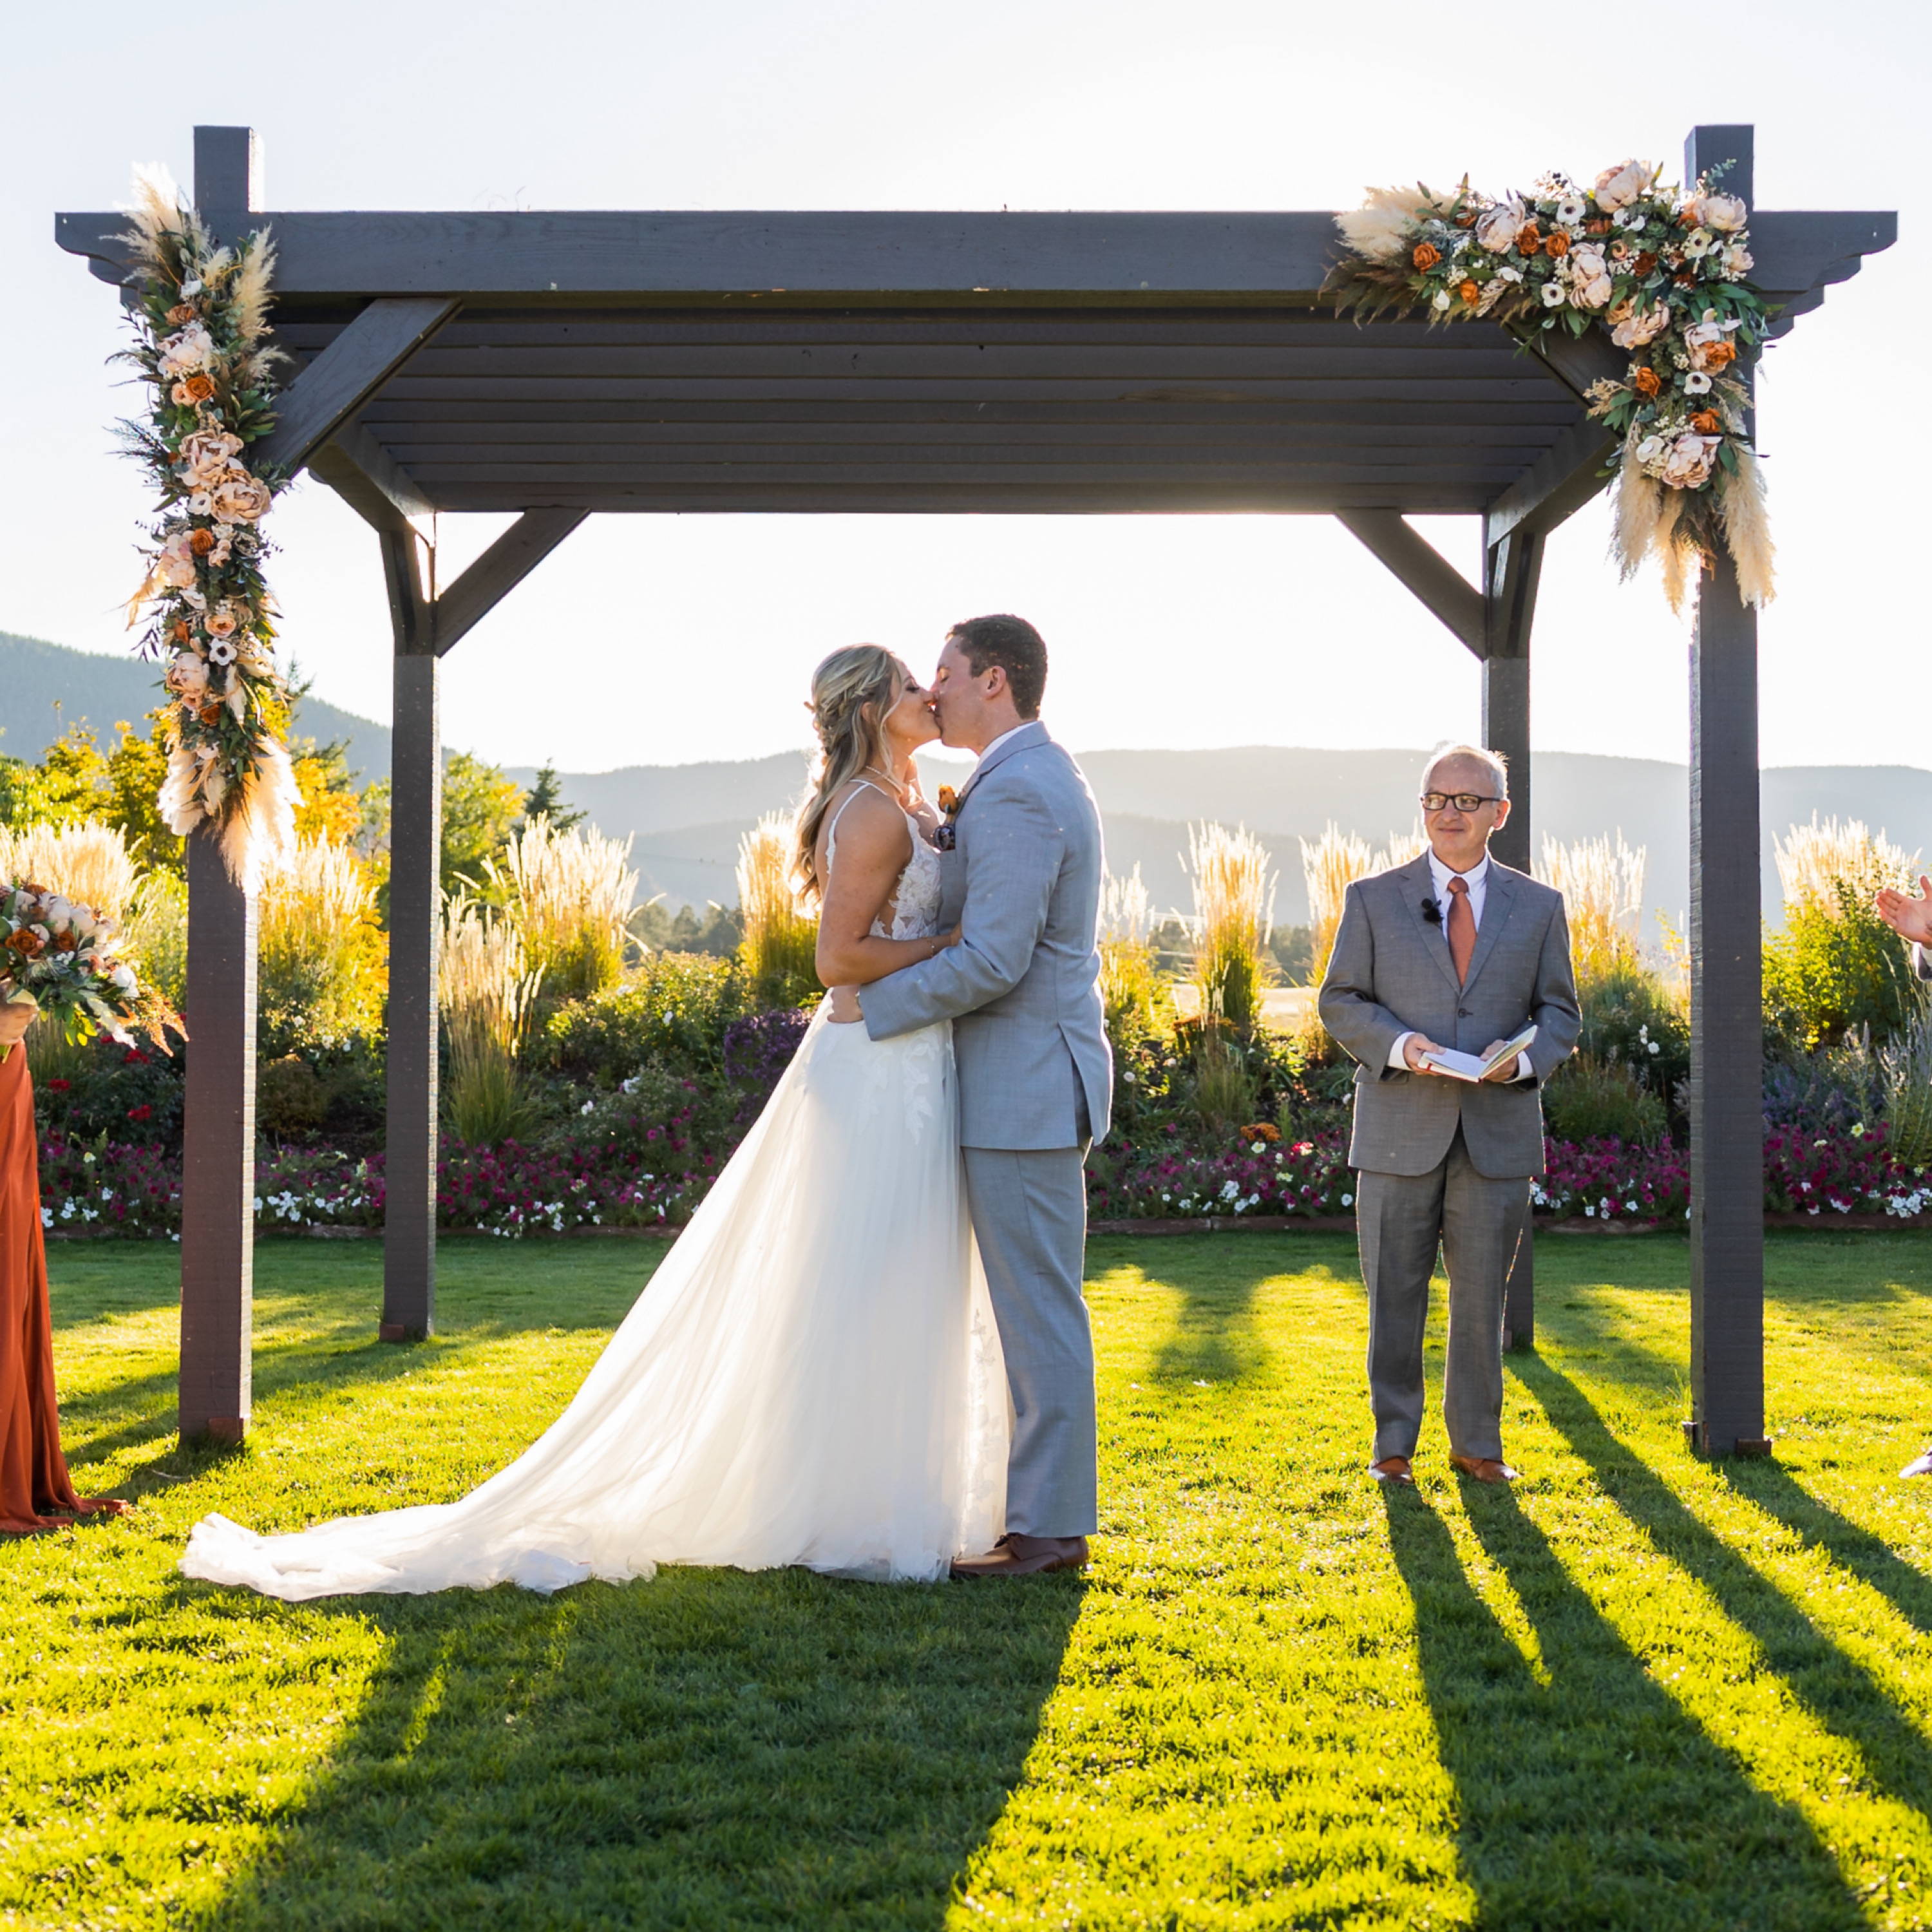 A couple shares their first kiss as husband and wife under a pergola decorated with 2 fall wedding floral swags